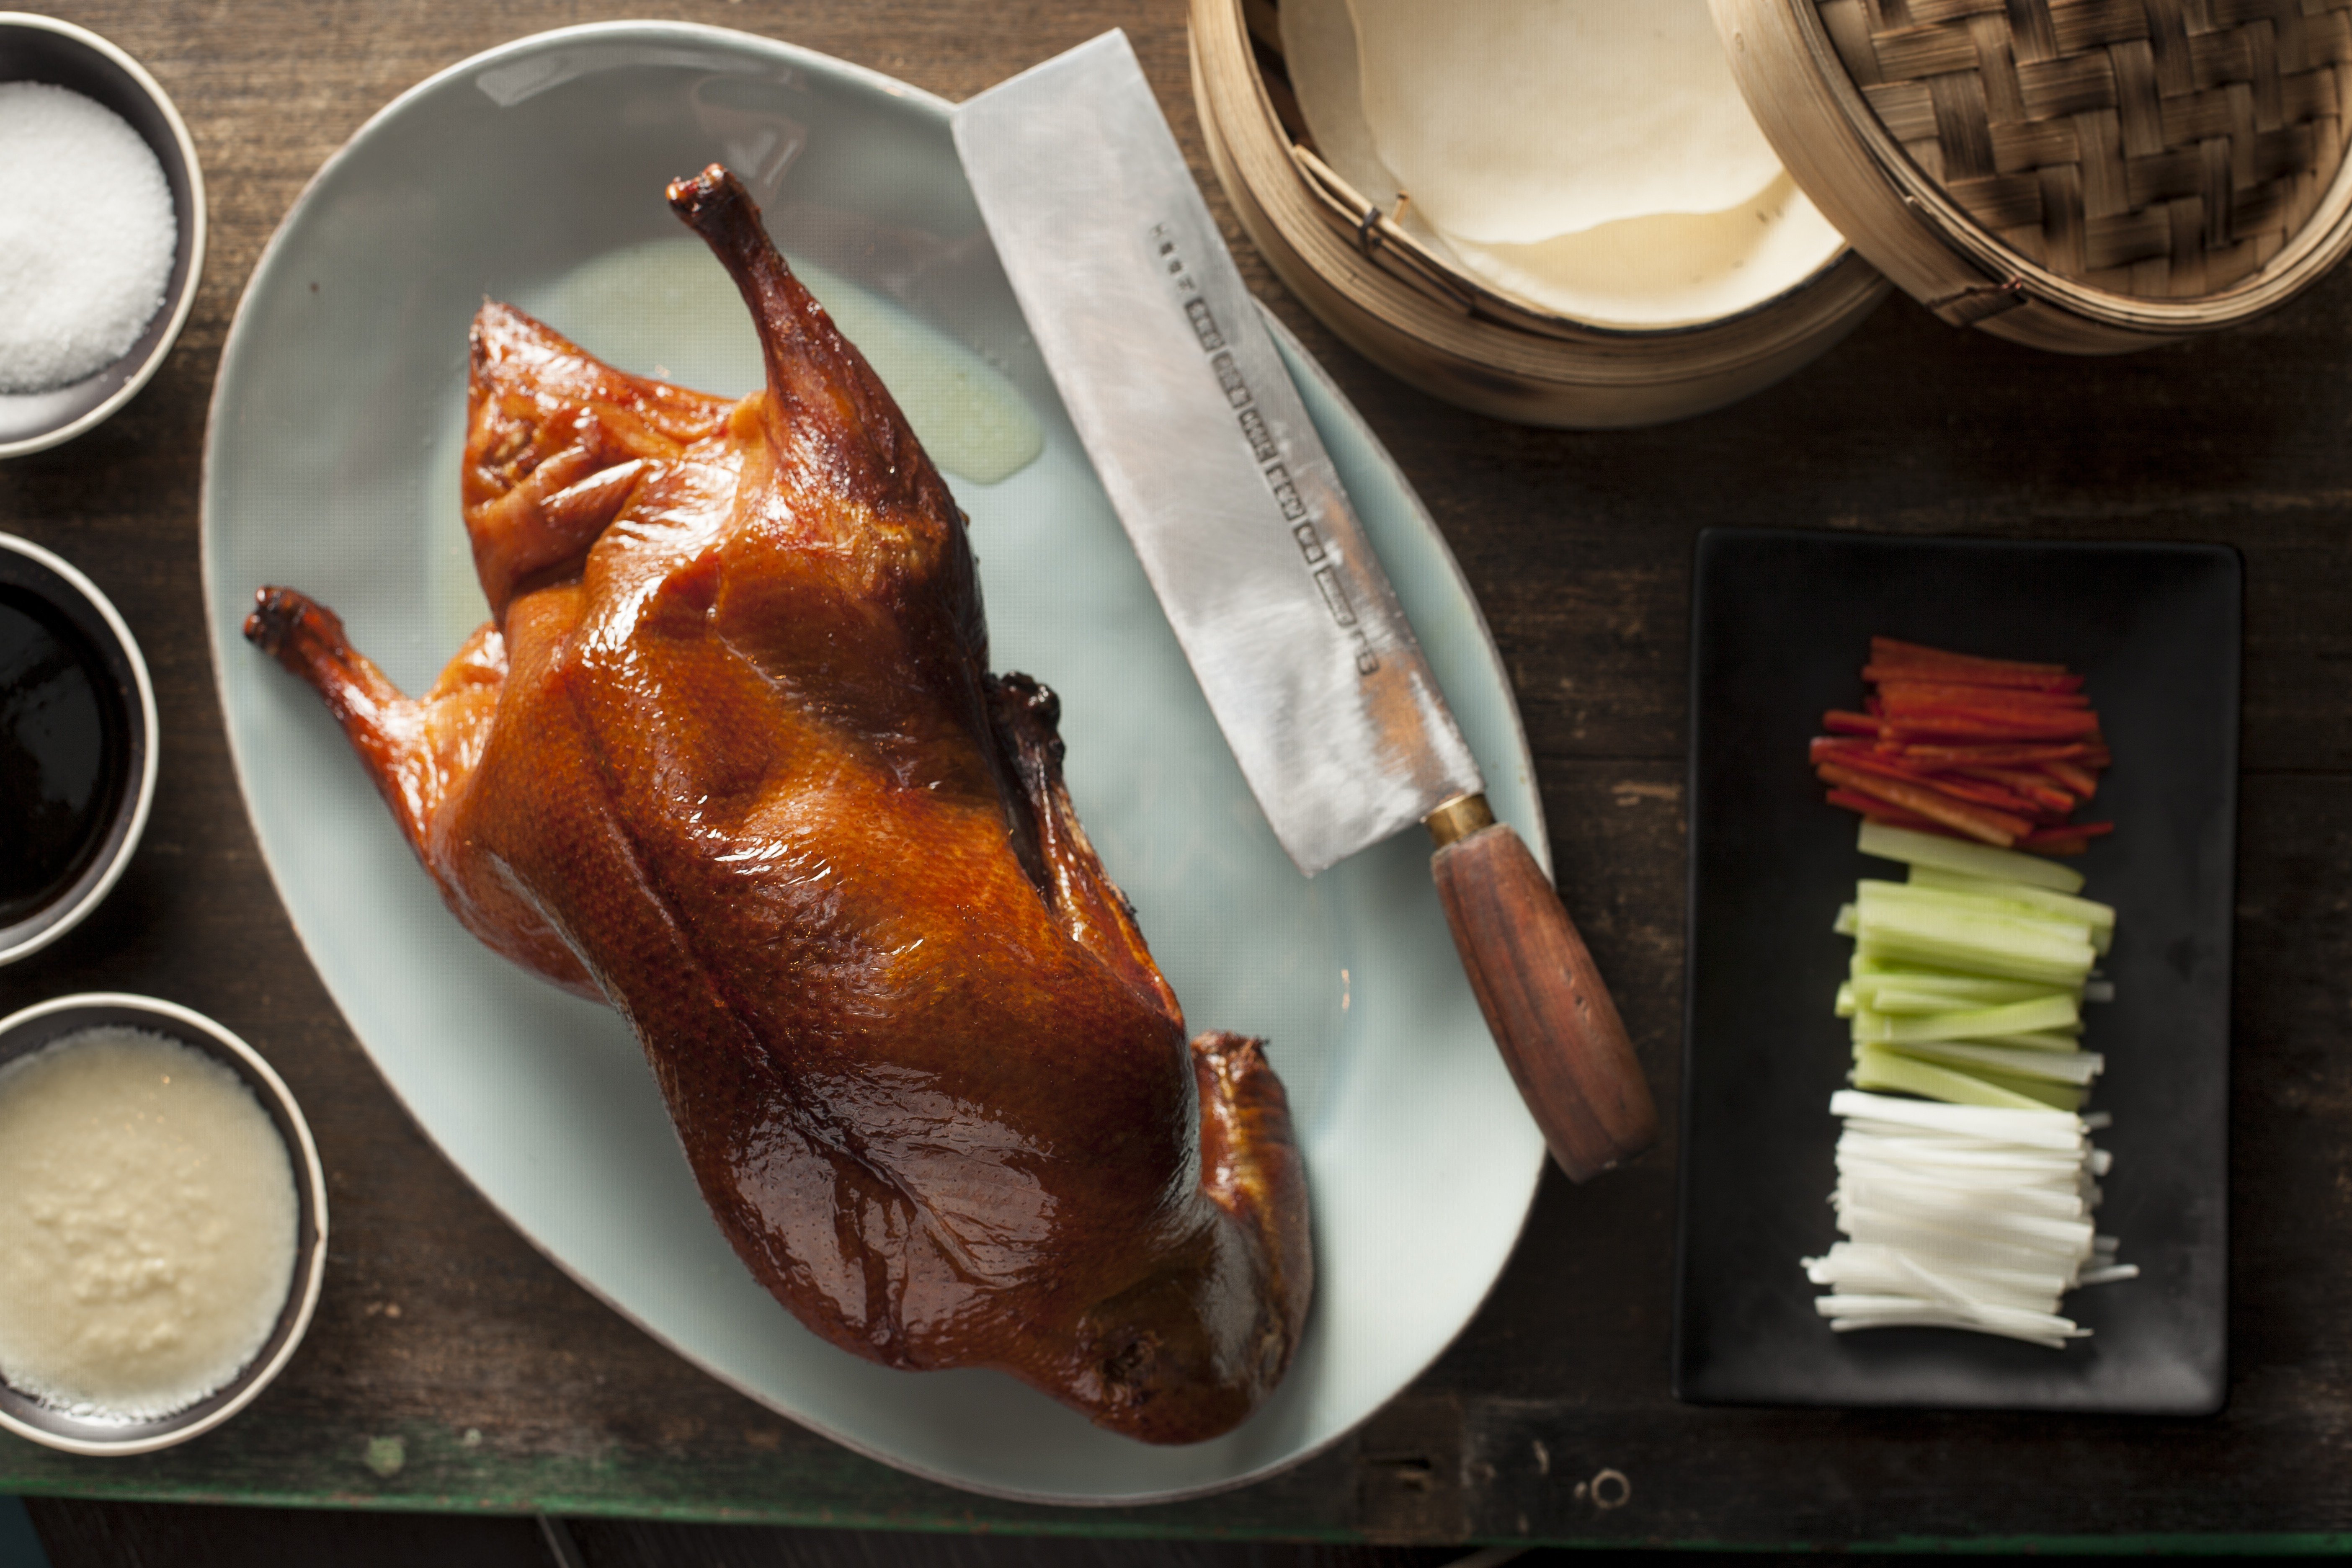 Mott 32’s apple wood-roasted Peking duck is available at the Palazzo in Las Vegas. Photo: Maximal Concepts